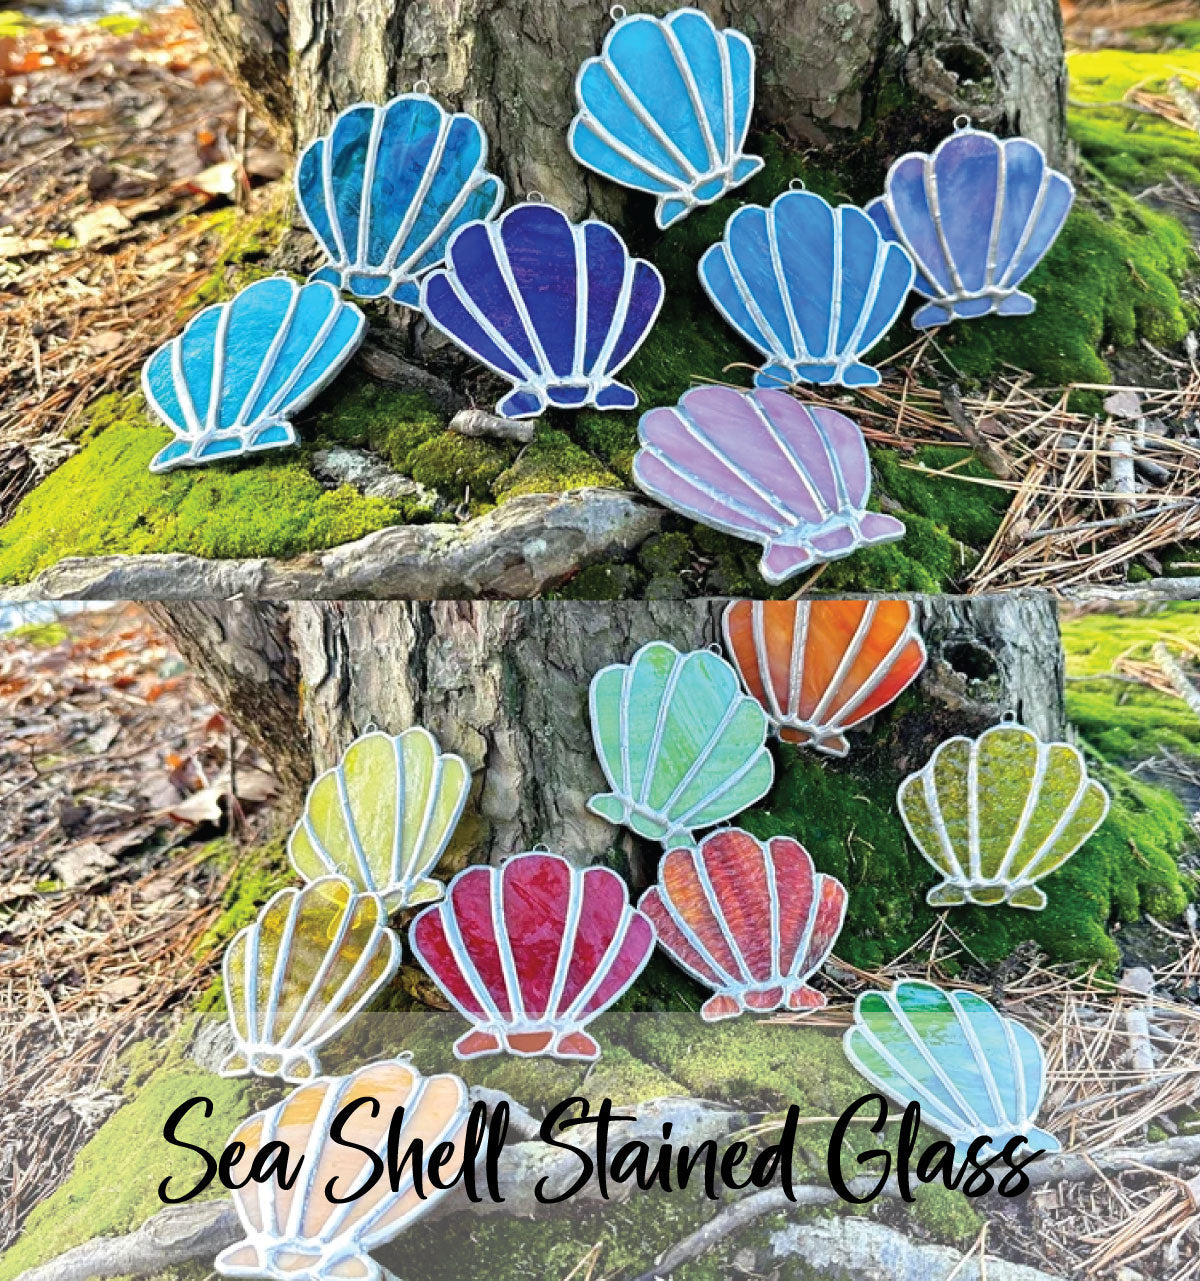 7/30 Seashell Stained Glass Workshop @7PM